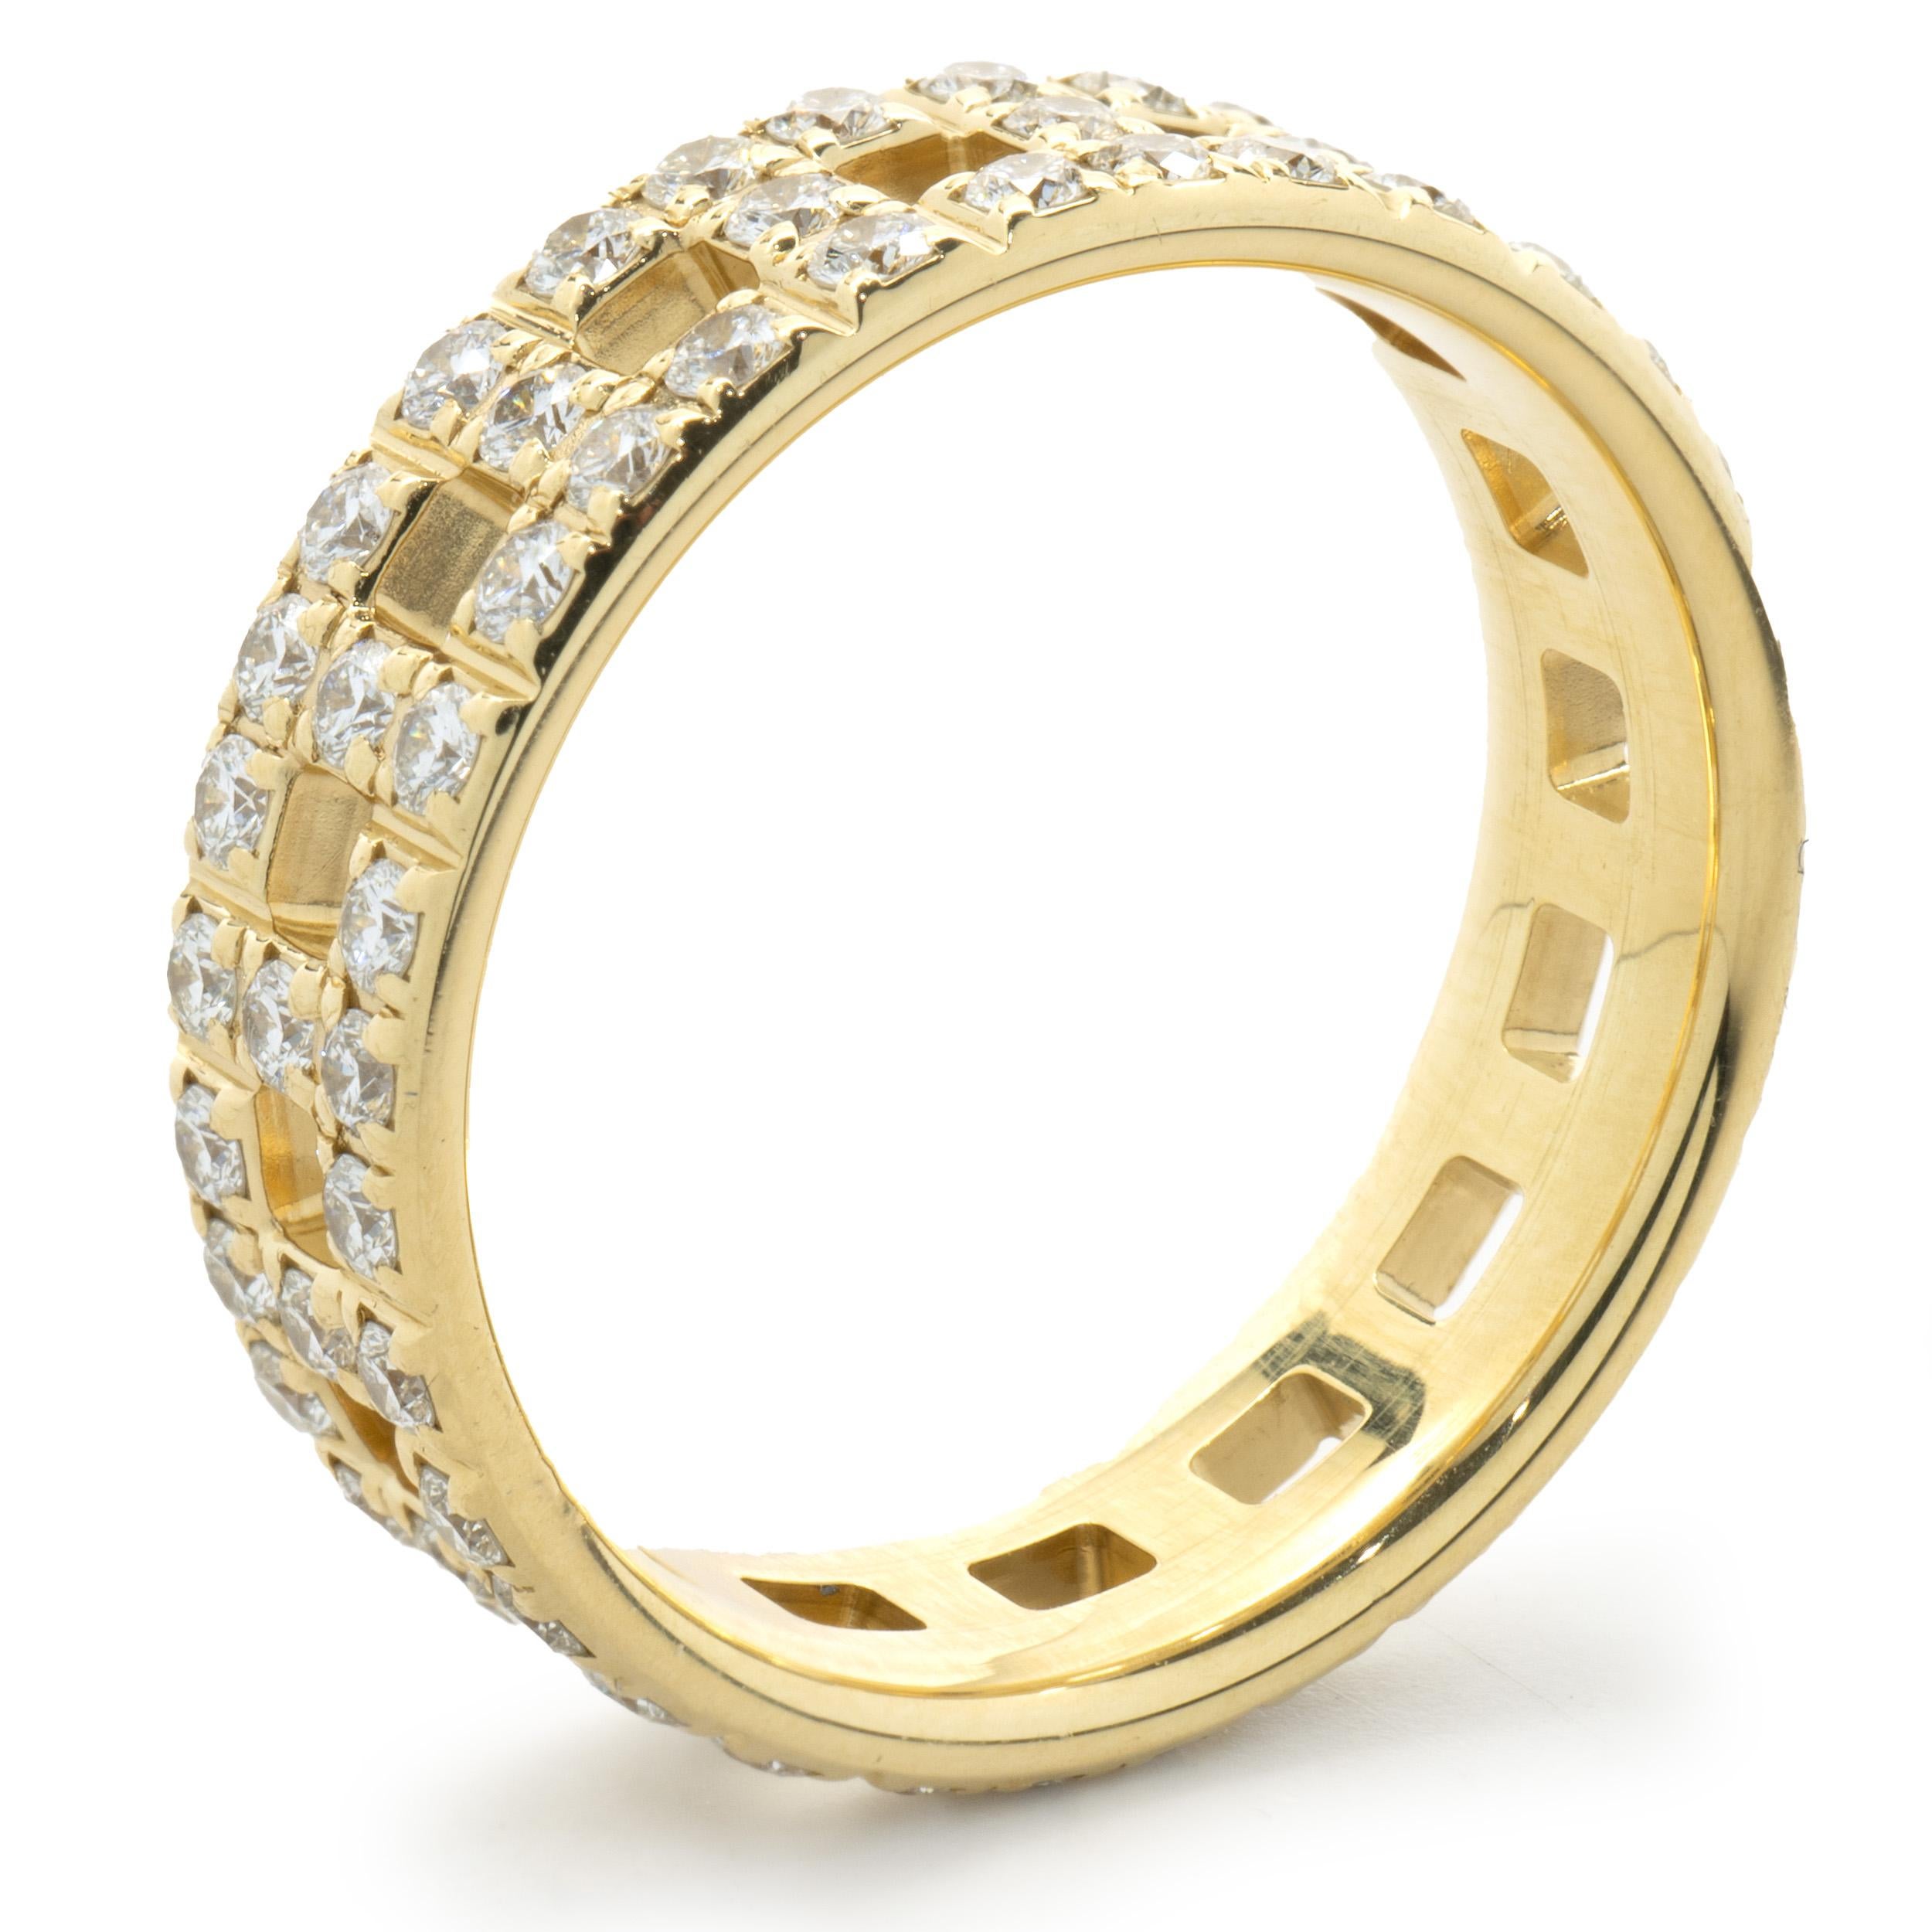 Designer: Tiffany & Co. 
Material: 18K yellow gold
Diamond: 80 round brilliant cut = 0.99cttw
Color: G
Clarity: VS1-2
Dimensions: ring top measures 6mm wide
Weight: 4.51 grams
Size: 6

No box or papers included